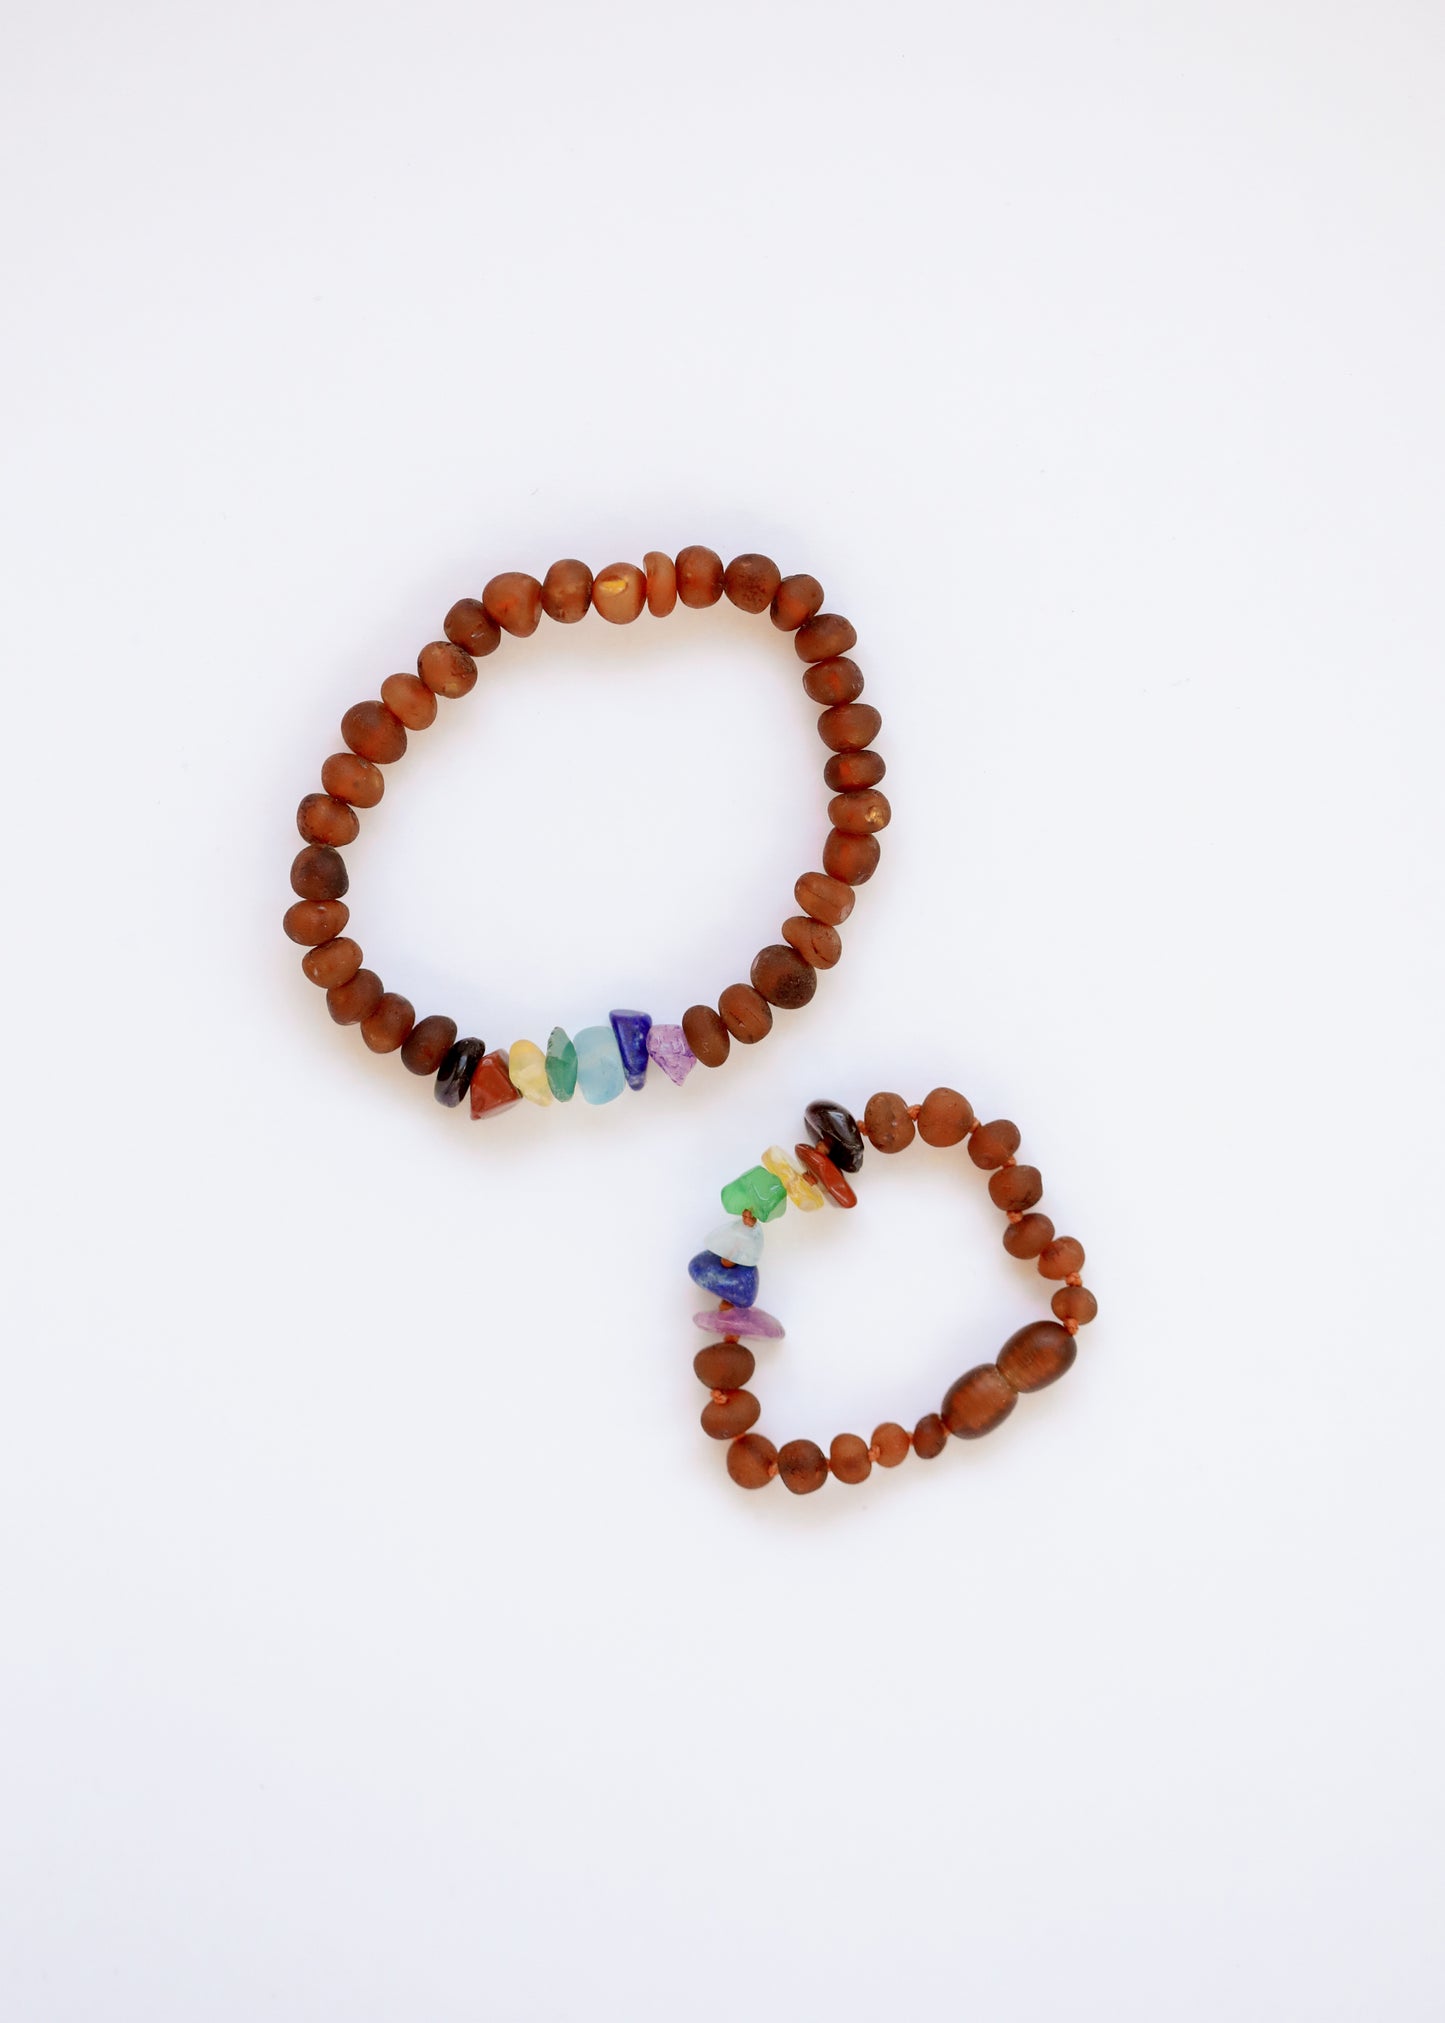 Raw Cognac Baltic Amber + Raw CHAKRA Crystals || Anklet or Bracelet